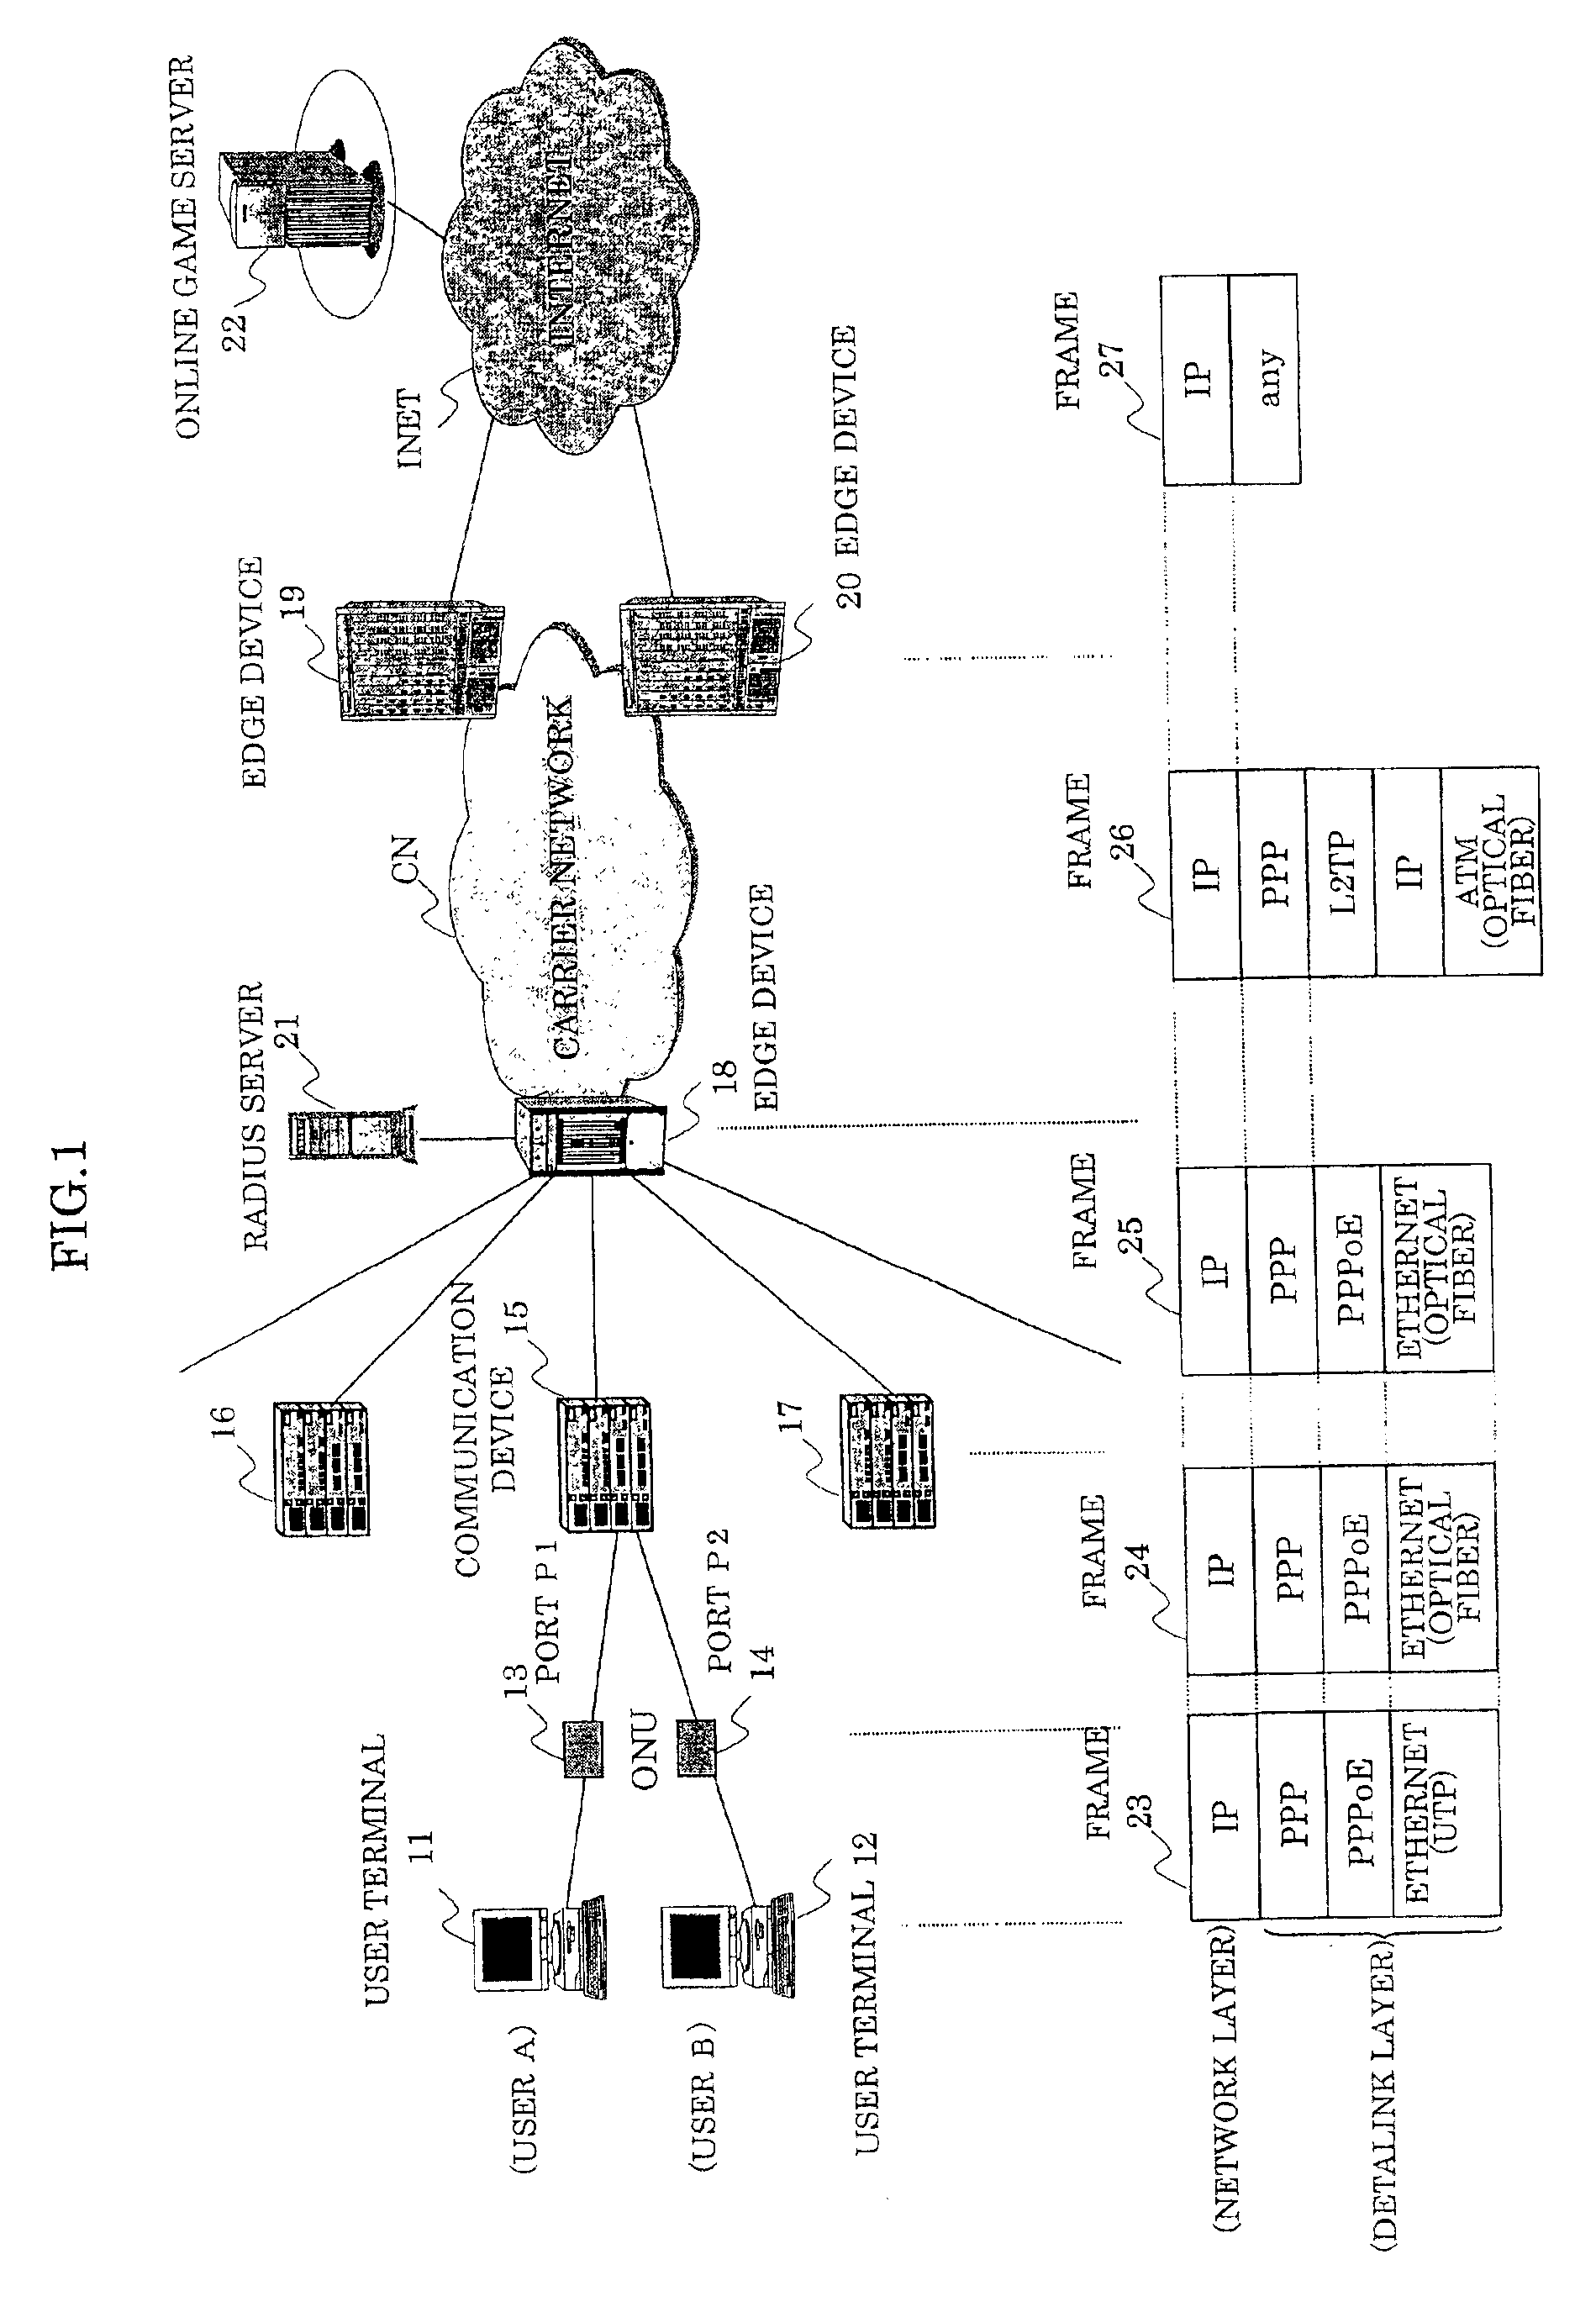 Communication device for monitoring datalink layer information and outputting data based on communication request information type